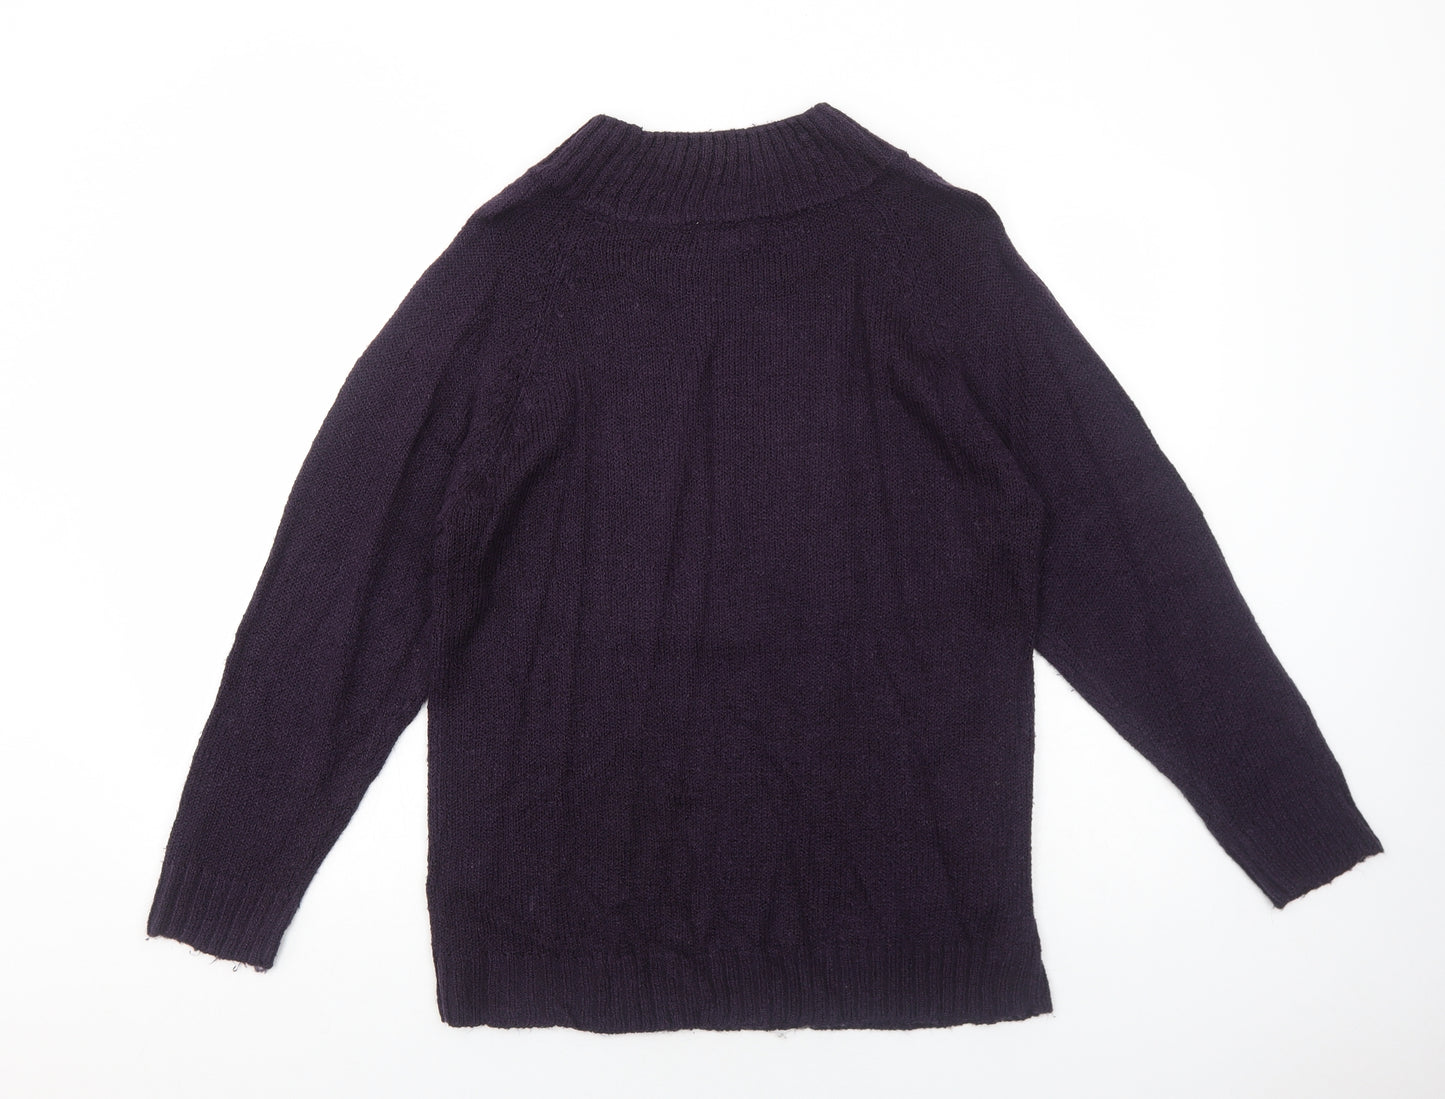 By Design Womens Purple Round Neck Acrylic Pullover Jumper Size M